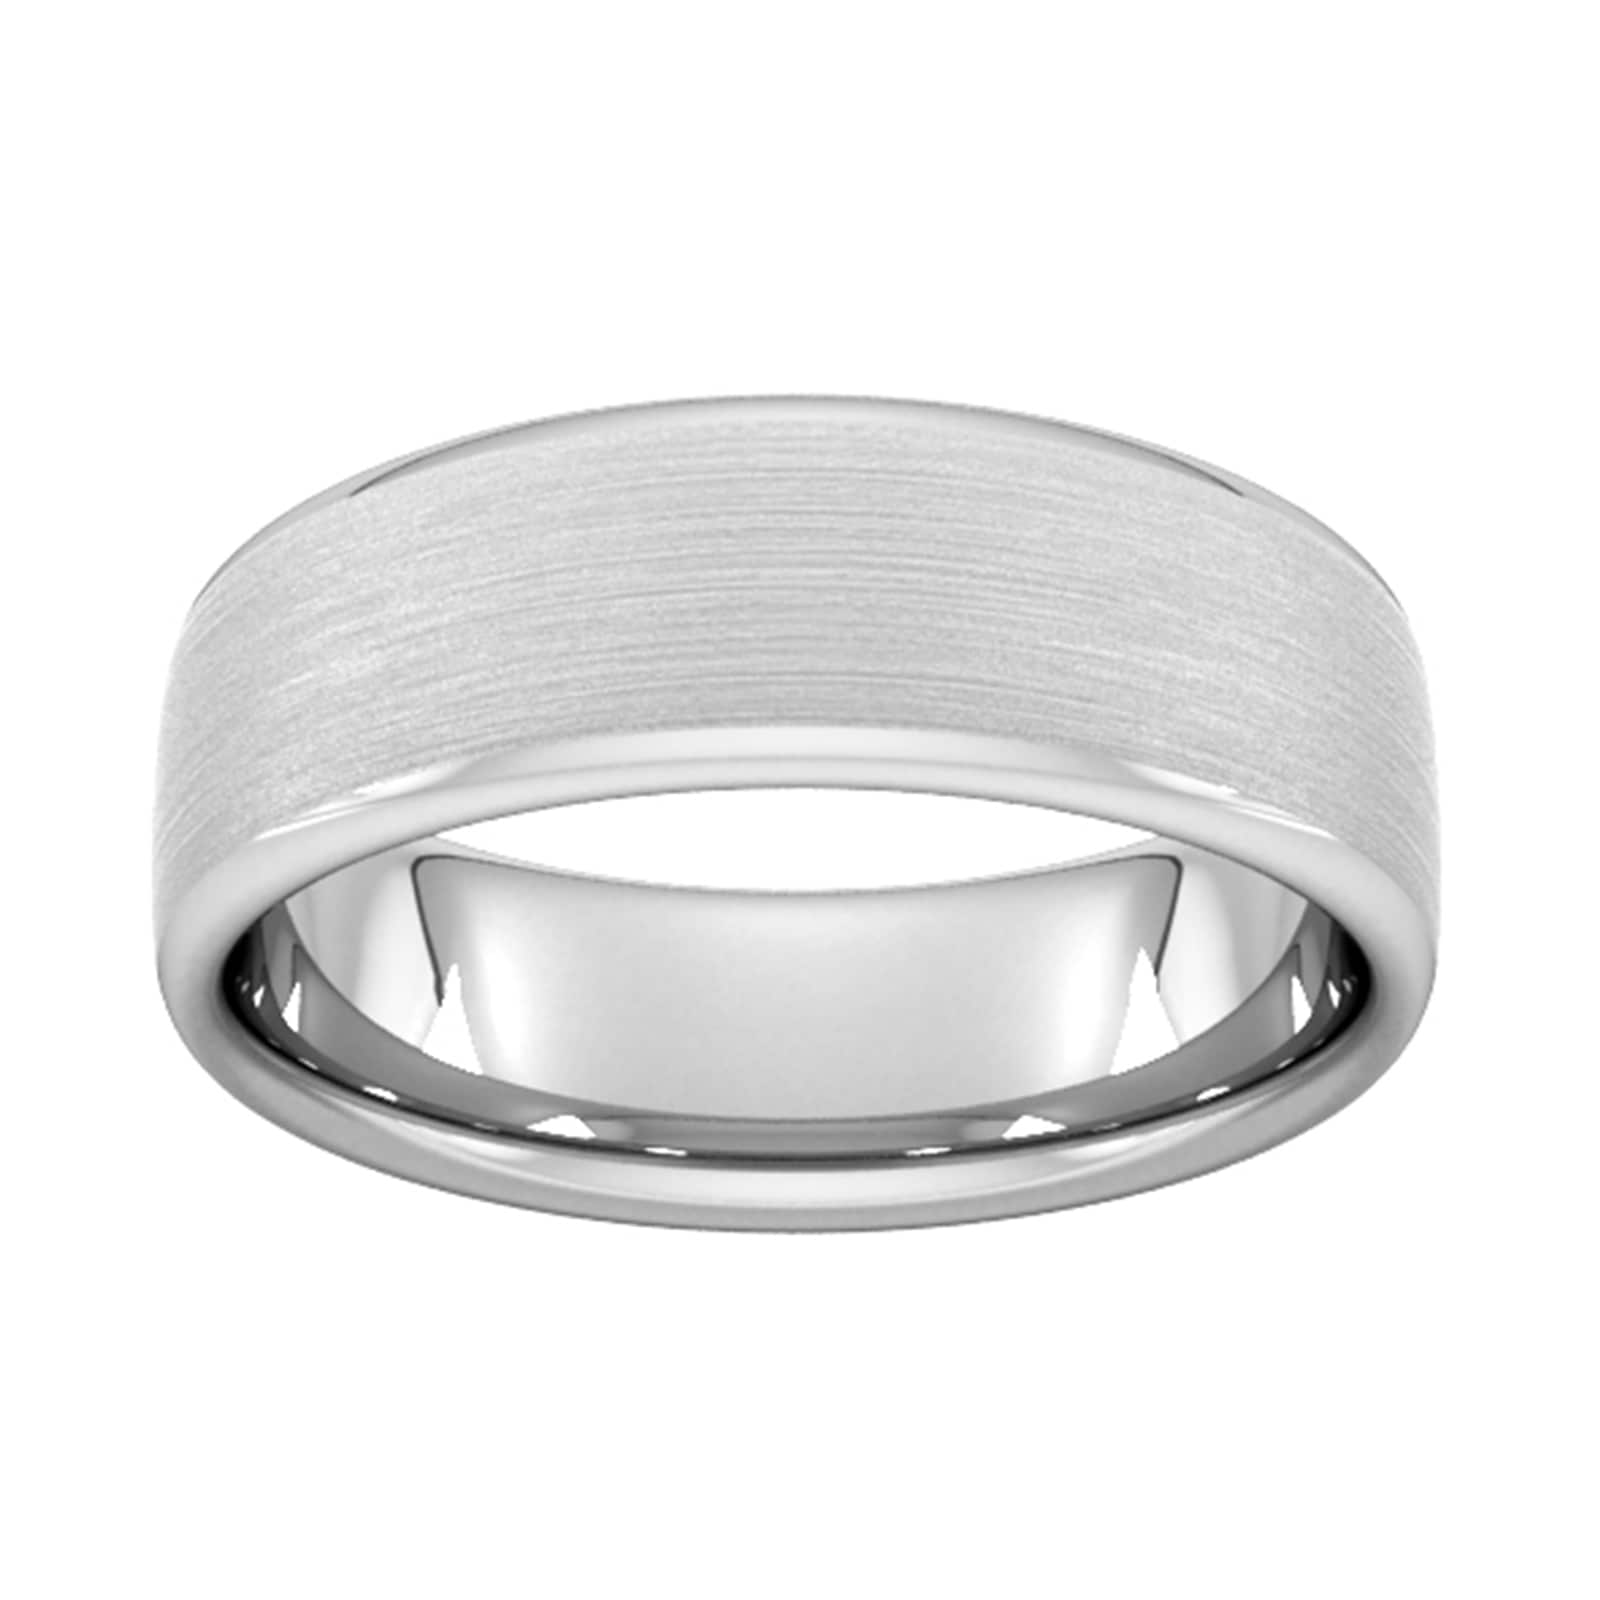 7mm Traditional Court Standard Matt Finished Wedding Ring In 9 Carat White Gold - Ring Size J